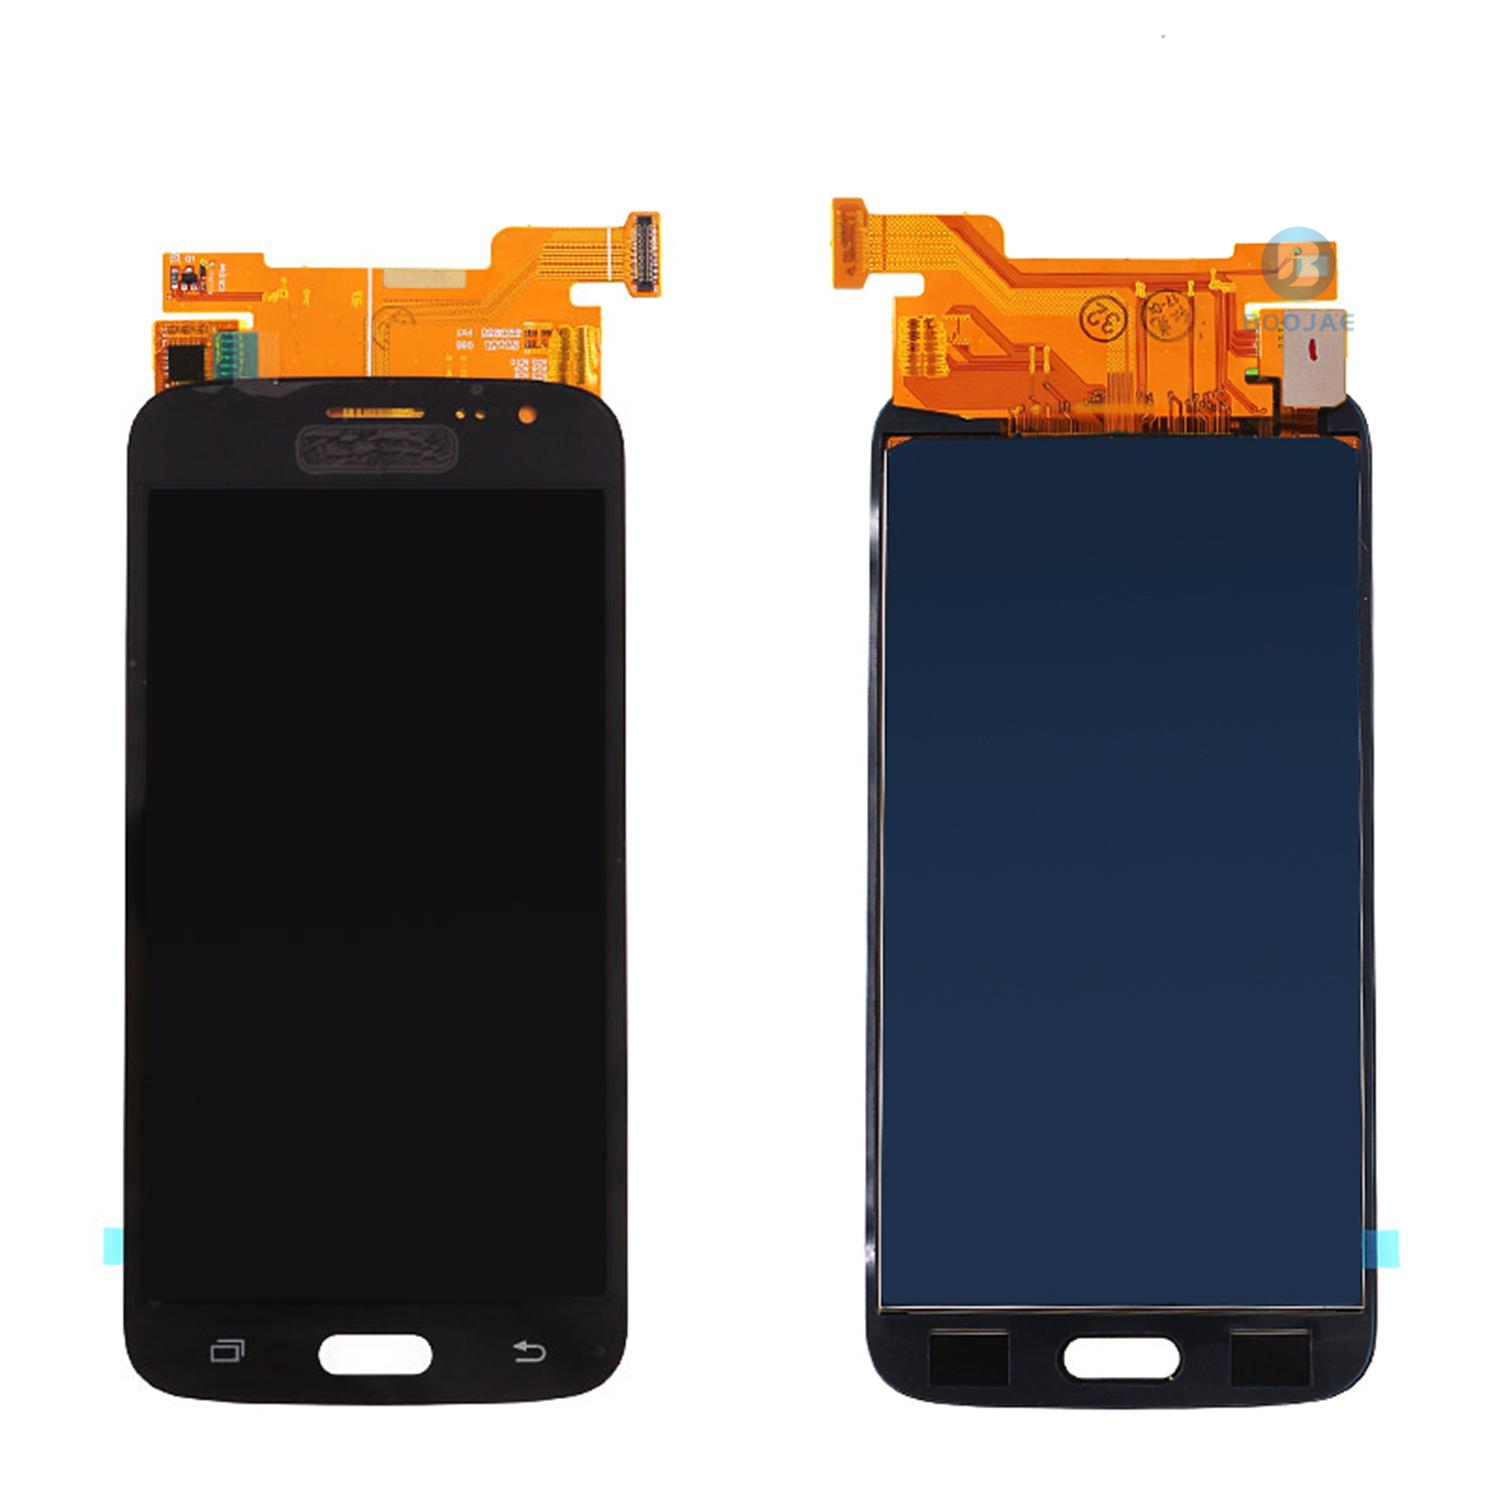 Samsung Galaxy J2 2016 J210 LCD Screen Display and Touch Panel Digitizer Assembly Replacement